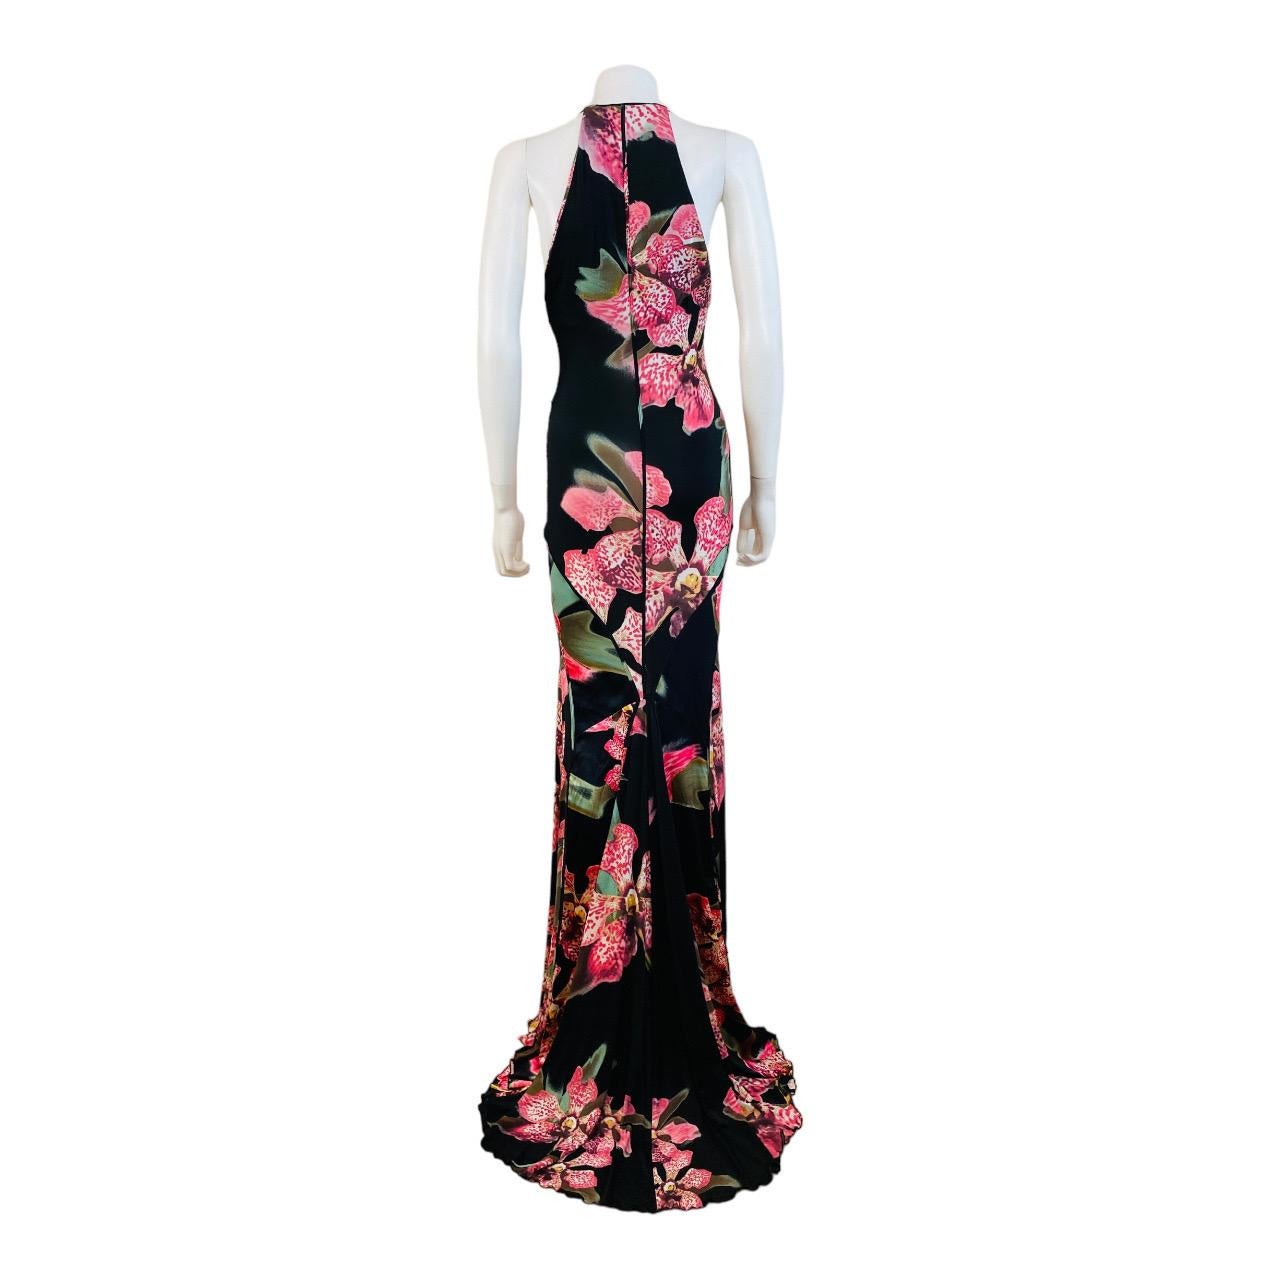 Vintage Roberto Cavalli F/W 2004 Floral Orchid Print Pink + Black Dress Gown For Sale 5